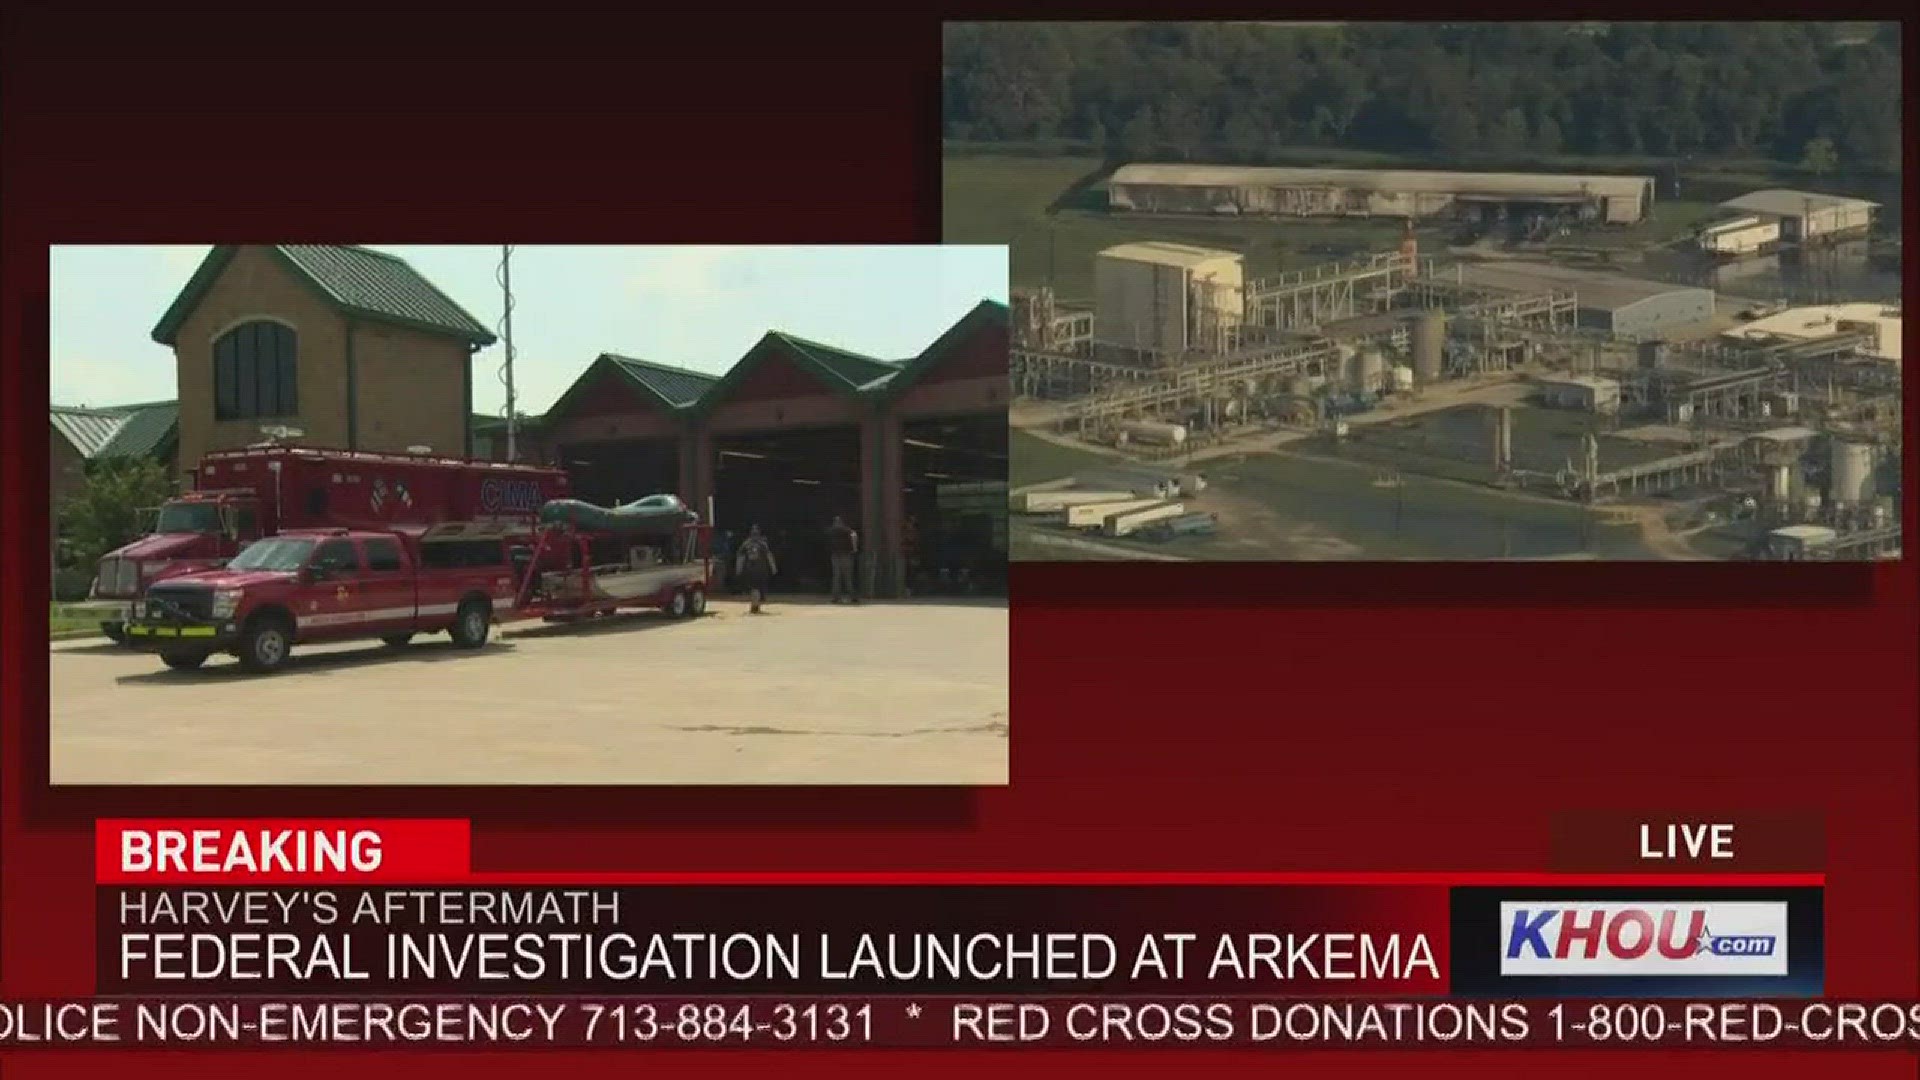 Arkema said it's not sure of the source of popping sounds heard near the plant.